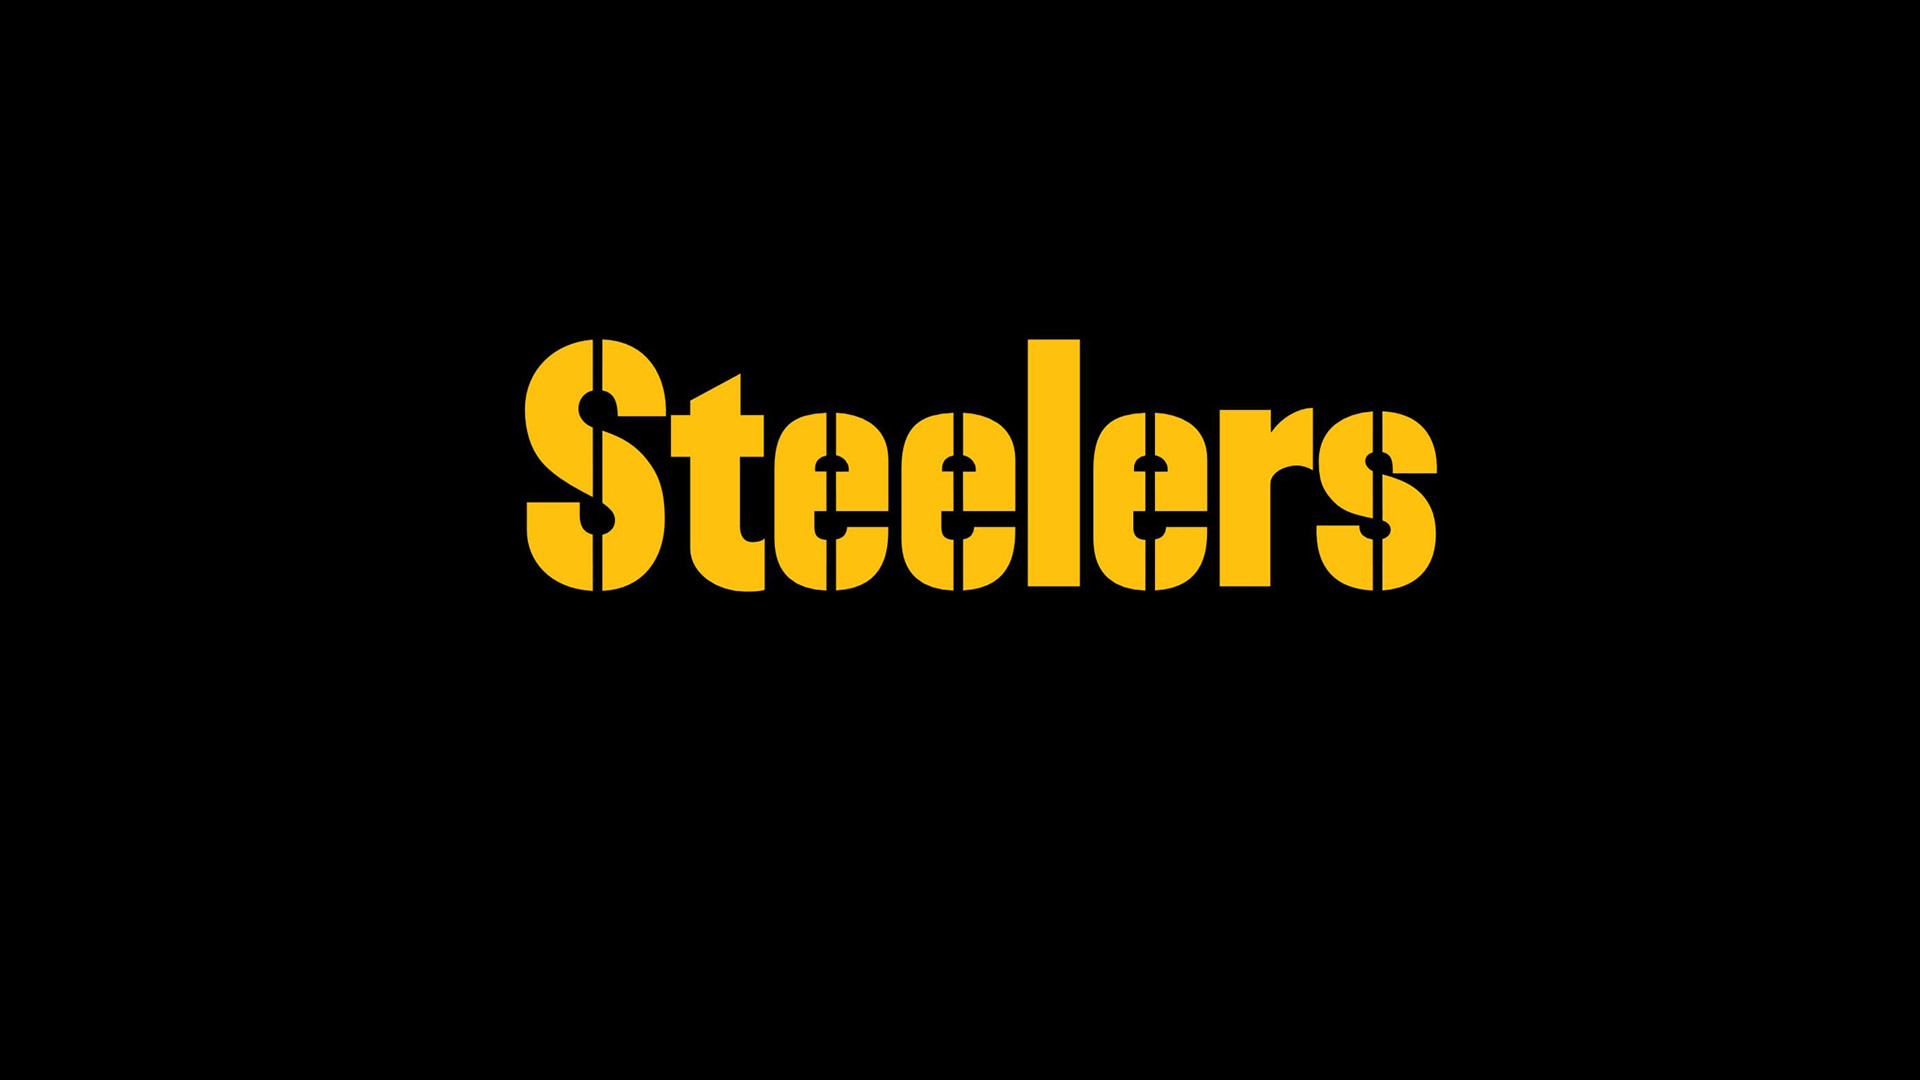 1920x1080 Steelers Text Wallpaper with Dark Background ...